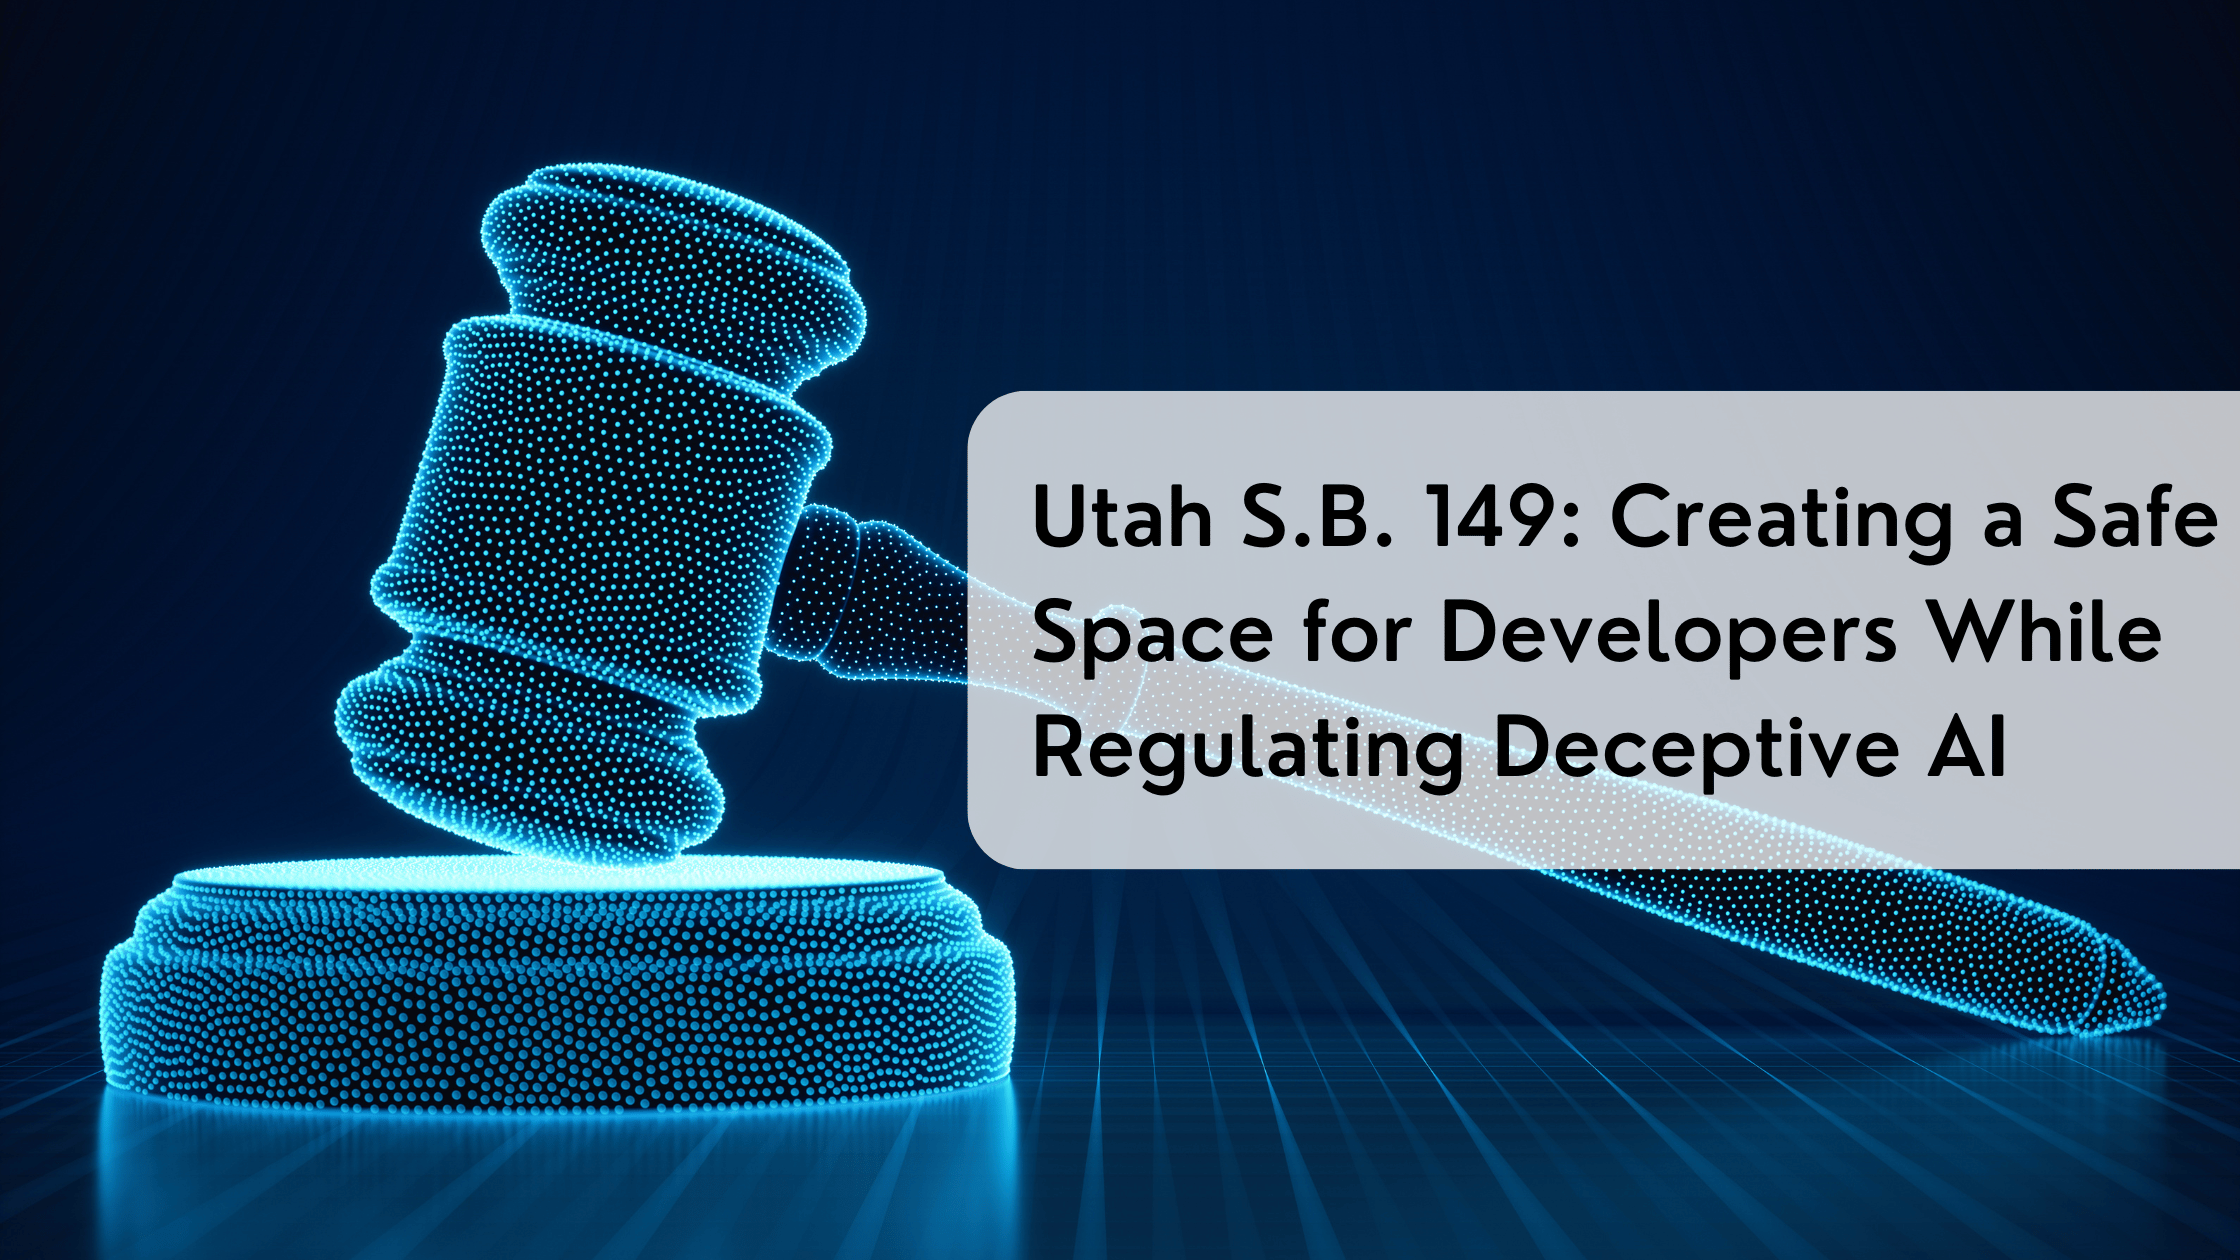 Utah S.B. 149: Creating a Safe Space for Developers While Regulating Deceptive AI